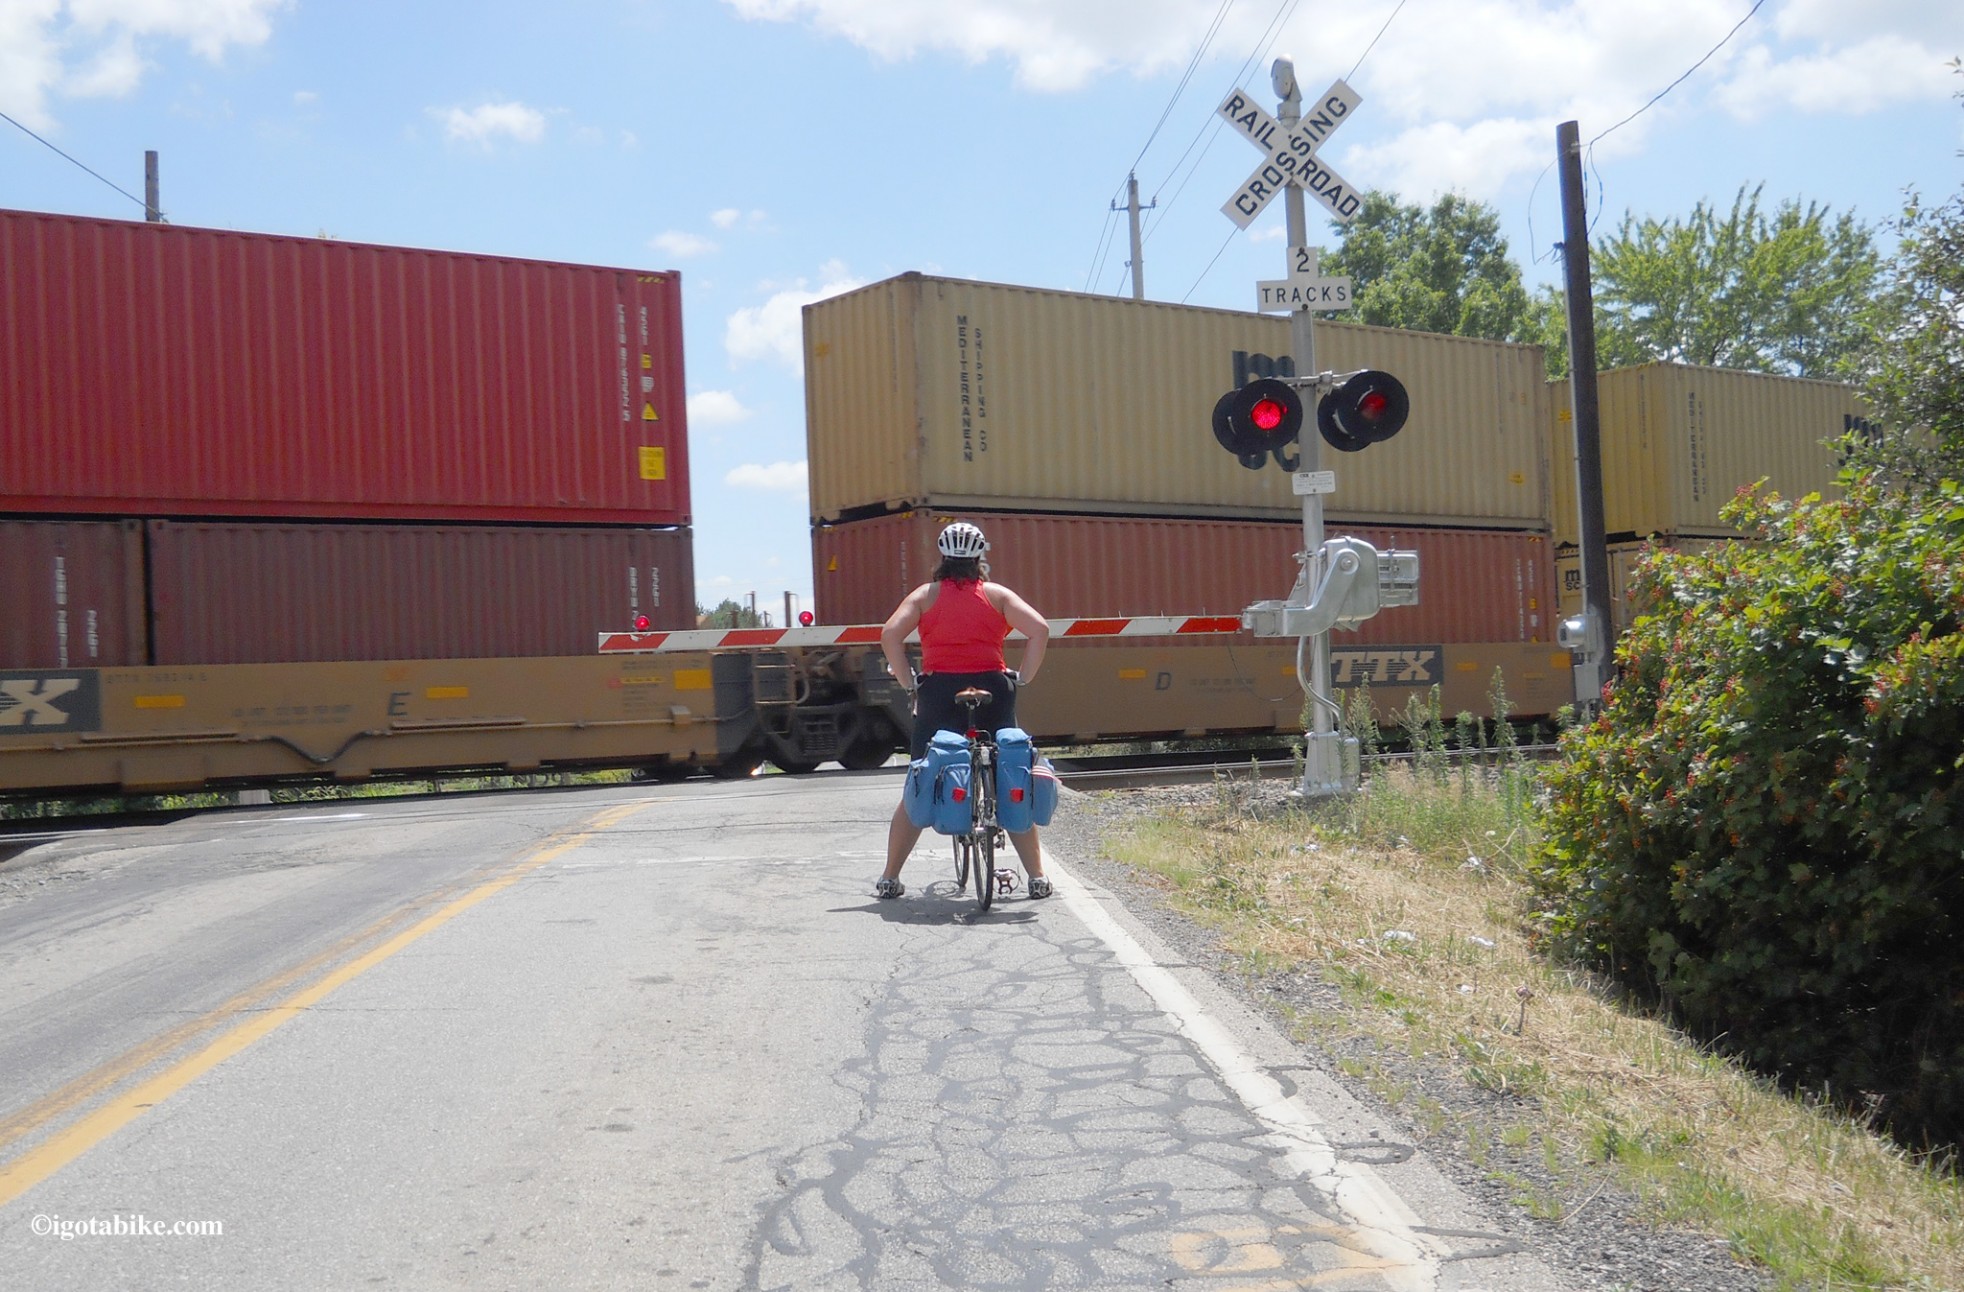 When bicycling in Lorain County you will encounter the main line tracks and the trains are going very fast! The train should be blurry in this photo as it was ripping past us at 50 mph.